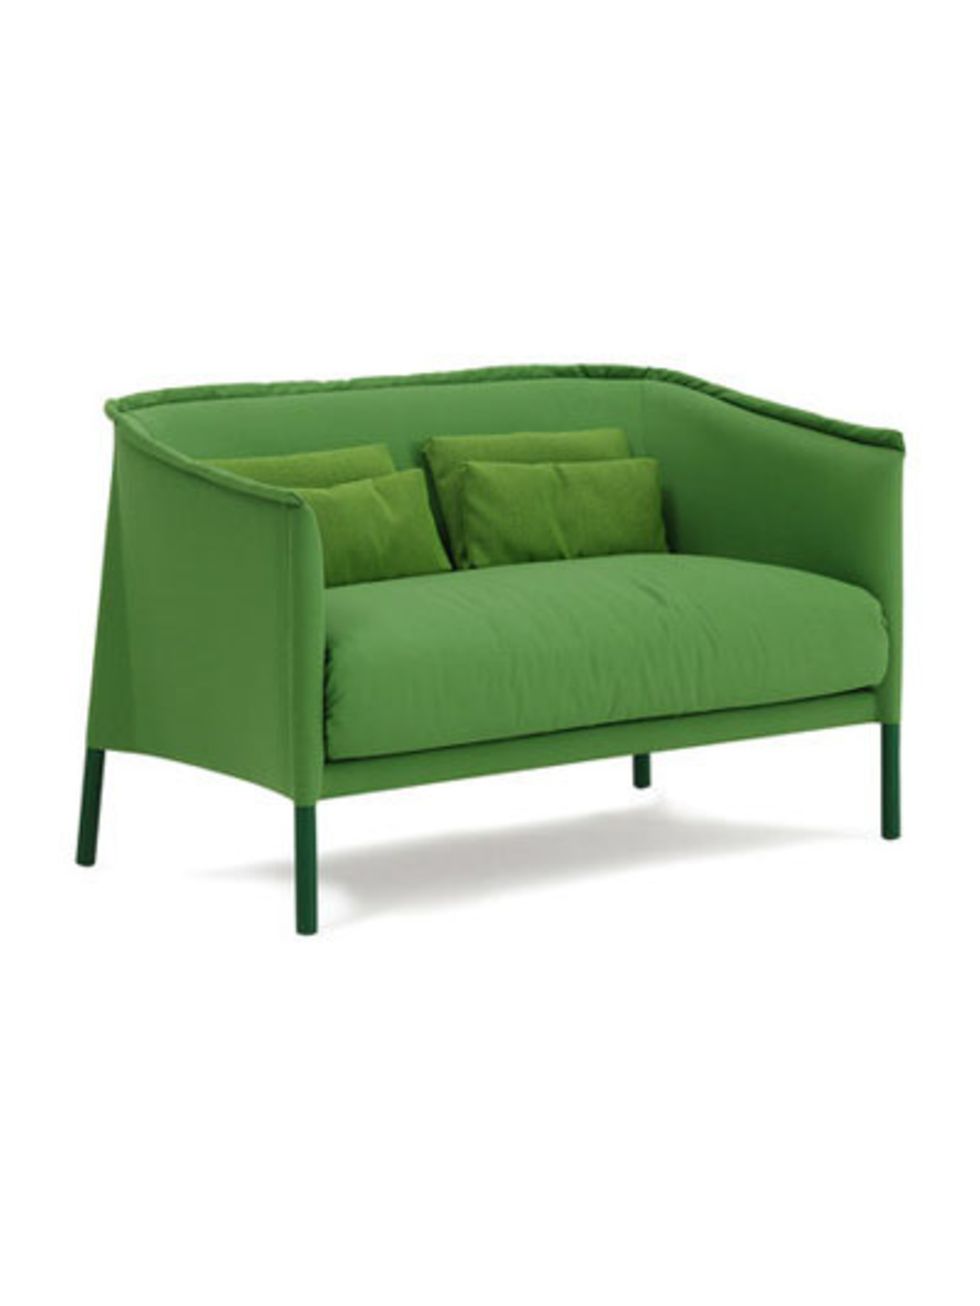 Green, Brown, Furniture, Couch, Outdoor furniture, Rectangle, Black, Beige, studio couch, Turquoise, 